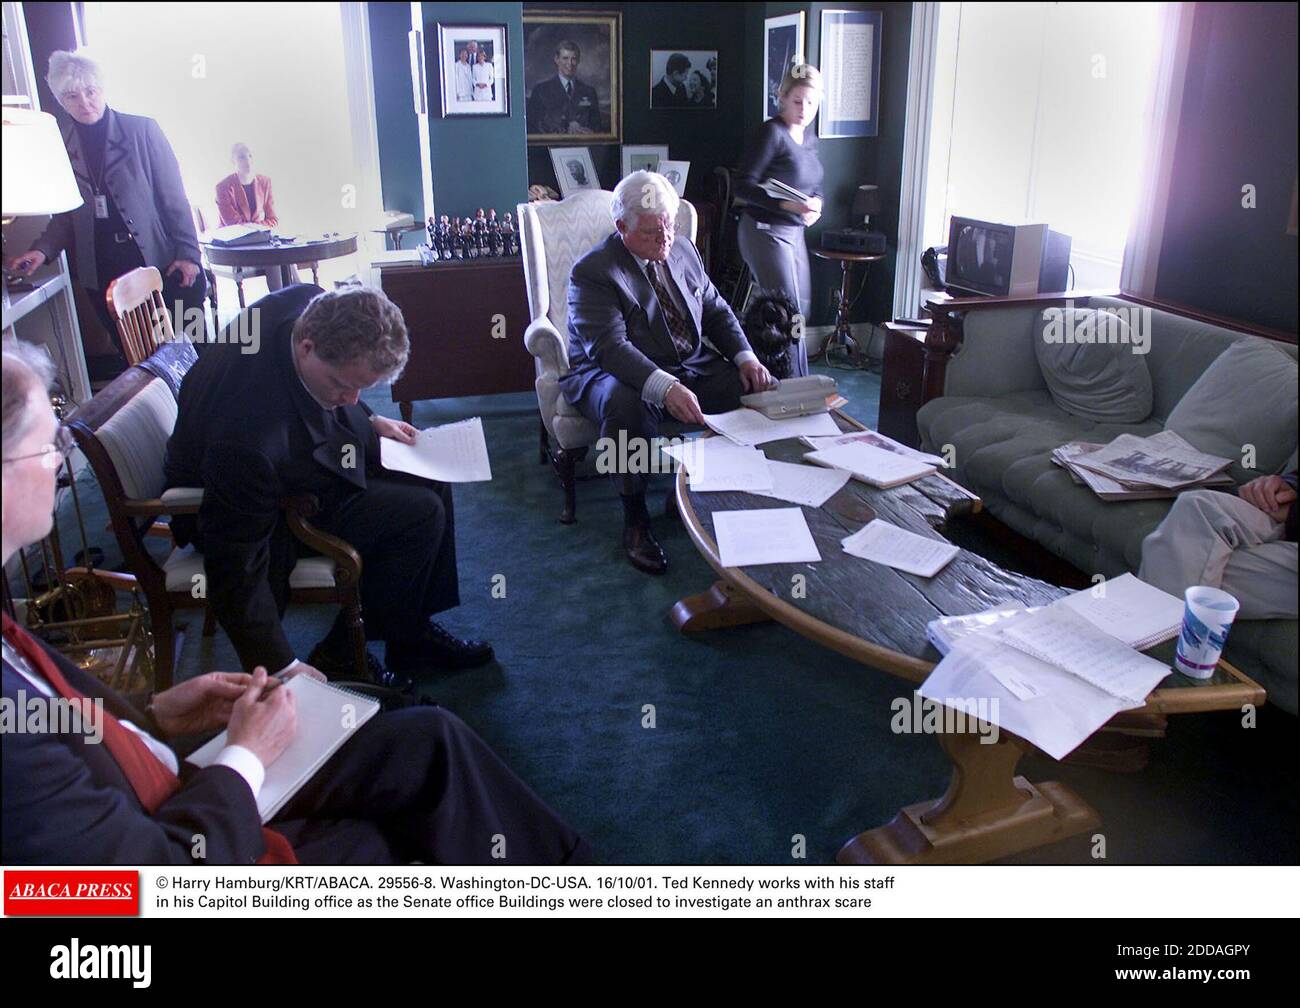 NO FILM, NO VIDEO, NO TV, NO DOCUMENTARY - © Harry Hamburg/KRT/ABACA. 29556-8. Washington-DC-USA. 16/10/01. Ted Kennedy works with his staff in his Capitol Building office as the Senate office Buildings were closed to investigate an anthrax scare Stock Photo